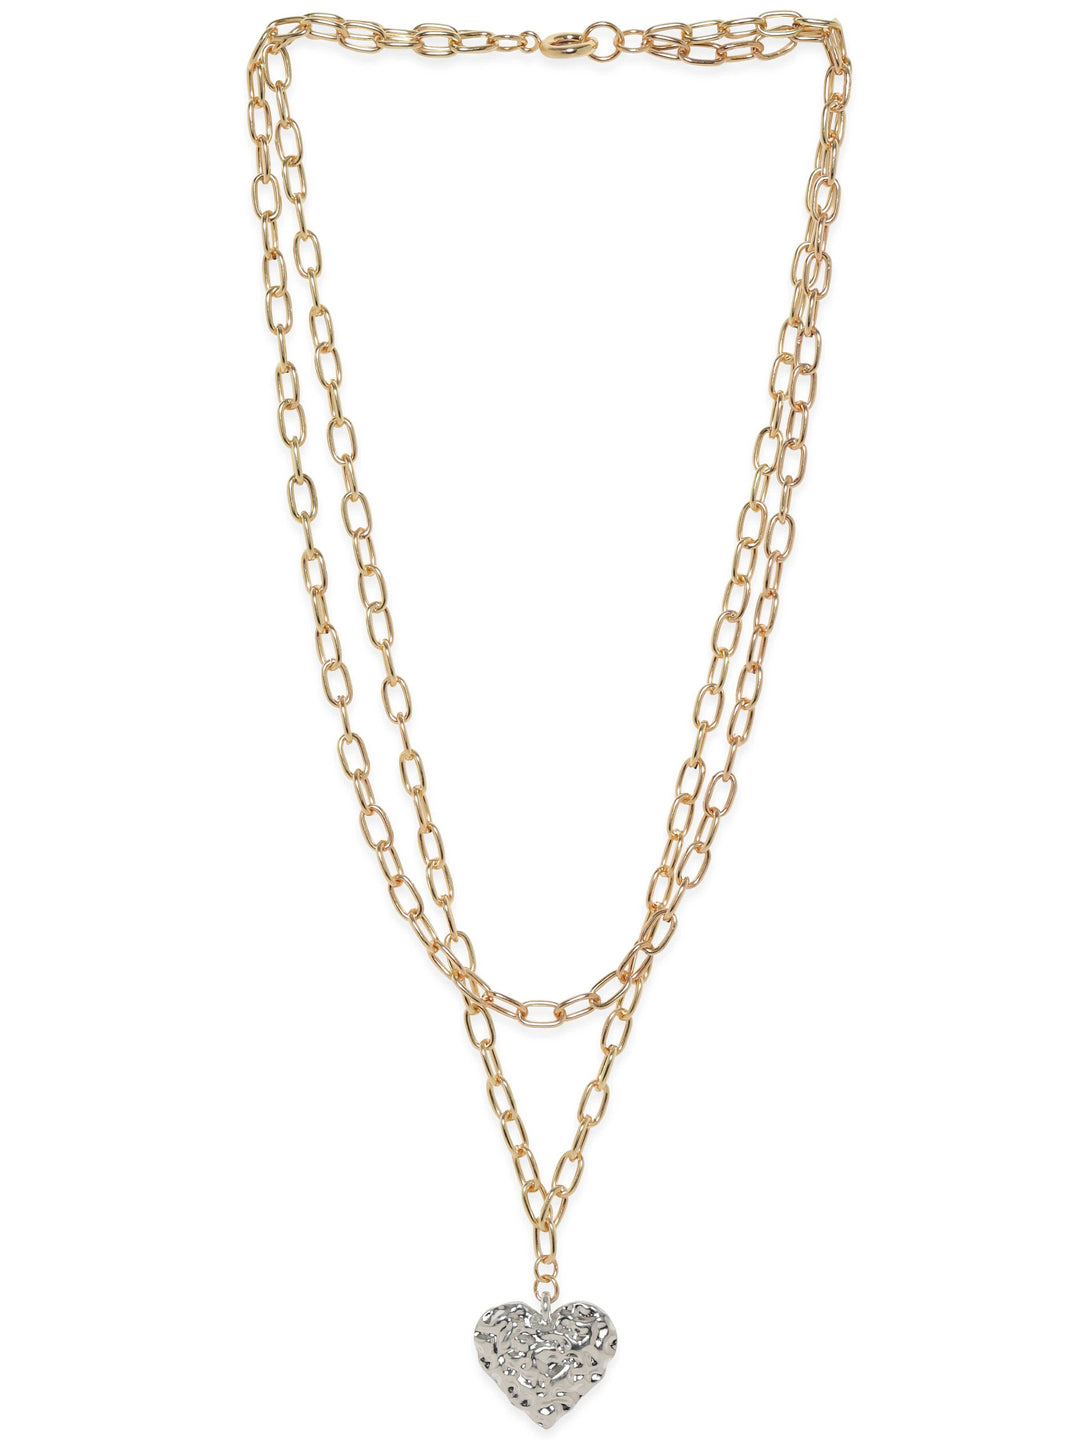 Rubans Voguish 18K Gold Plated Link Chain Heart Motif Layered Necklace Necklace